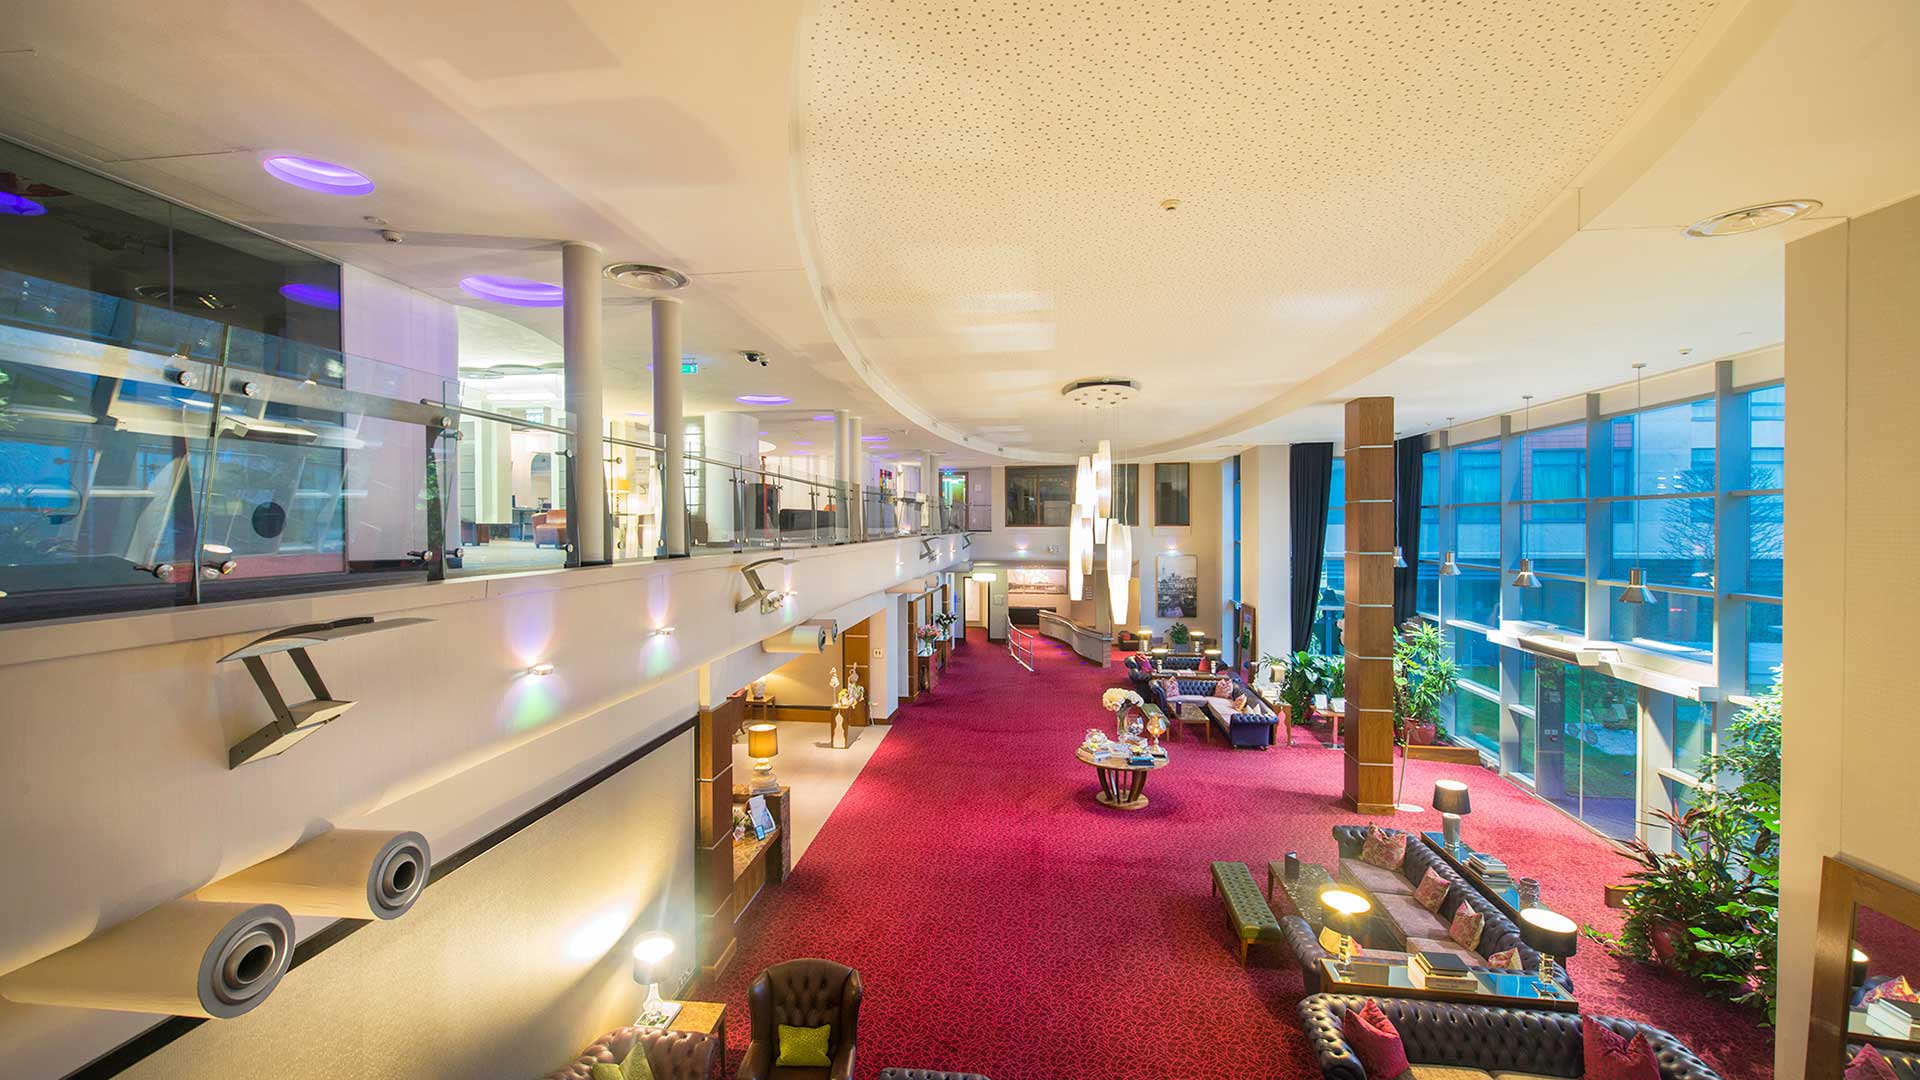 View from above of the Cork International Hotel lobby and reception